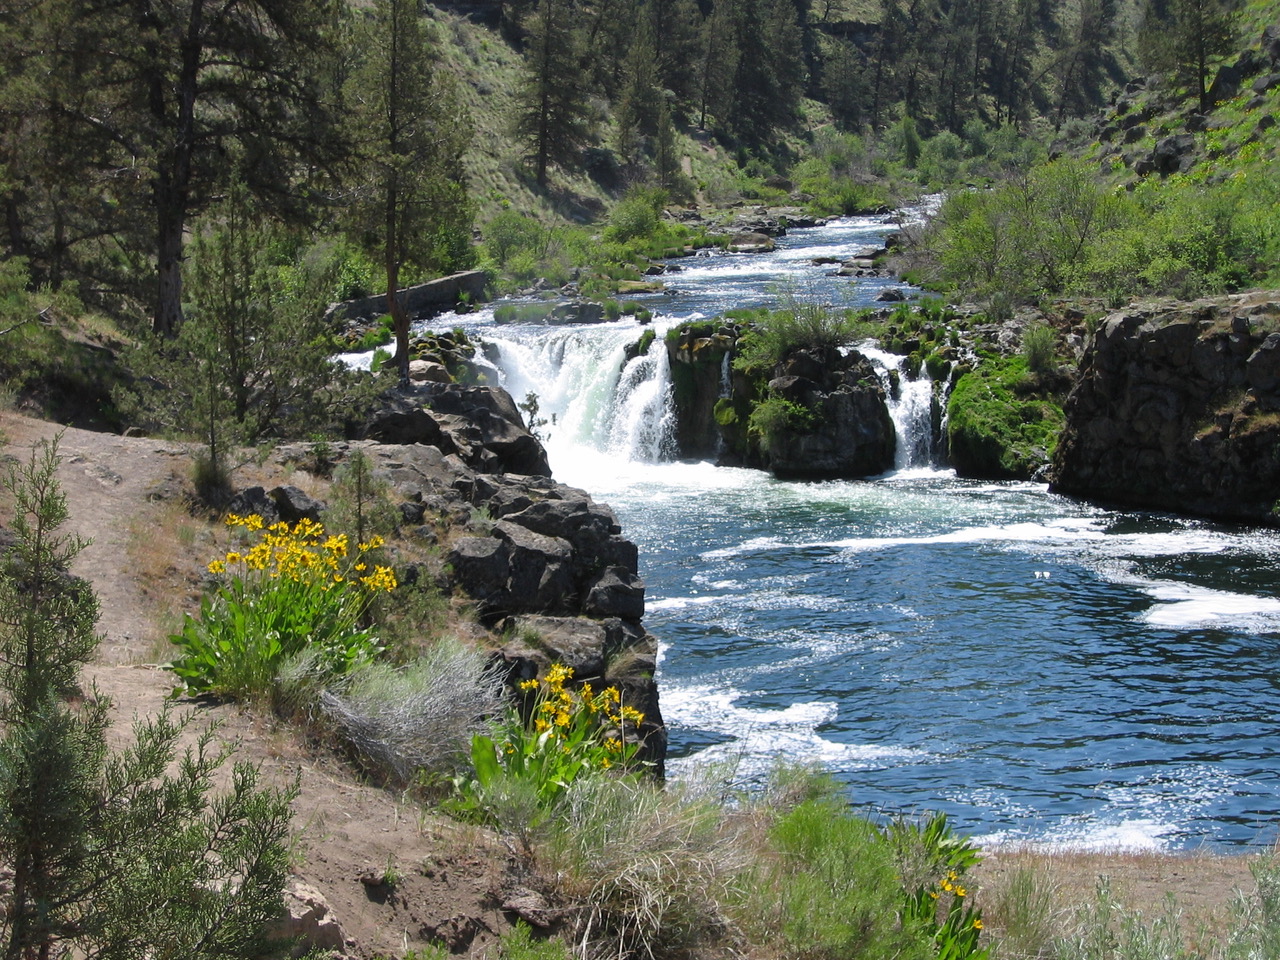 Steelhead Falls viewed towards the south (upriver) from the east bank of the Deschutes River......May 14, 2004.